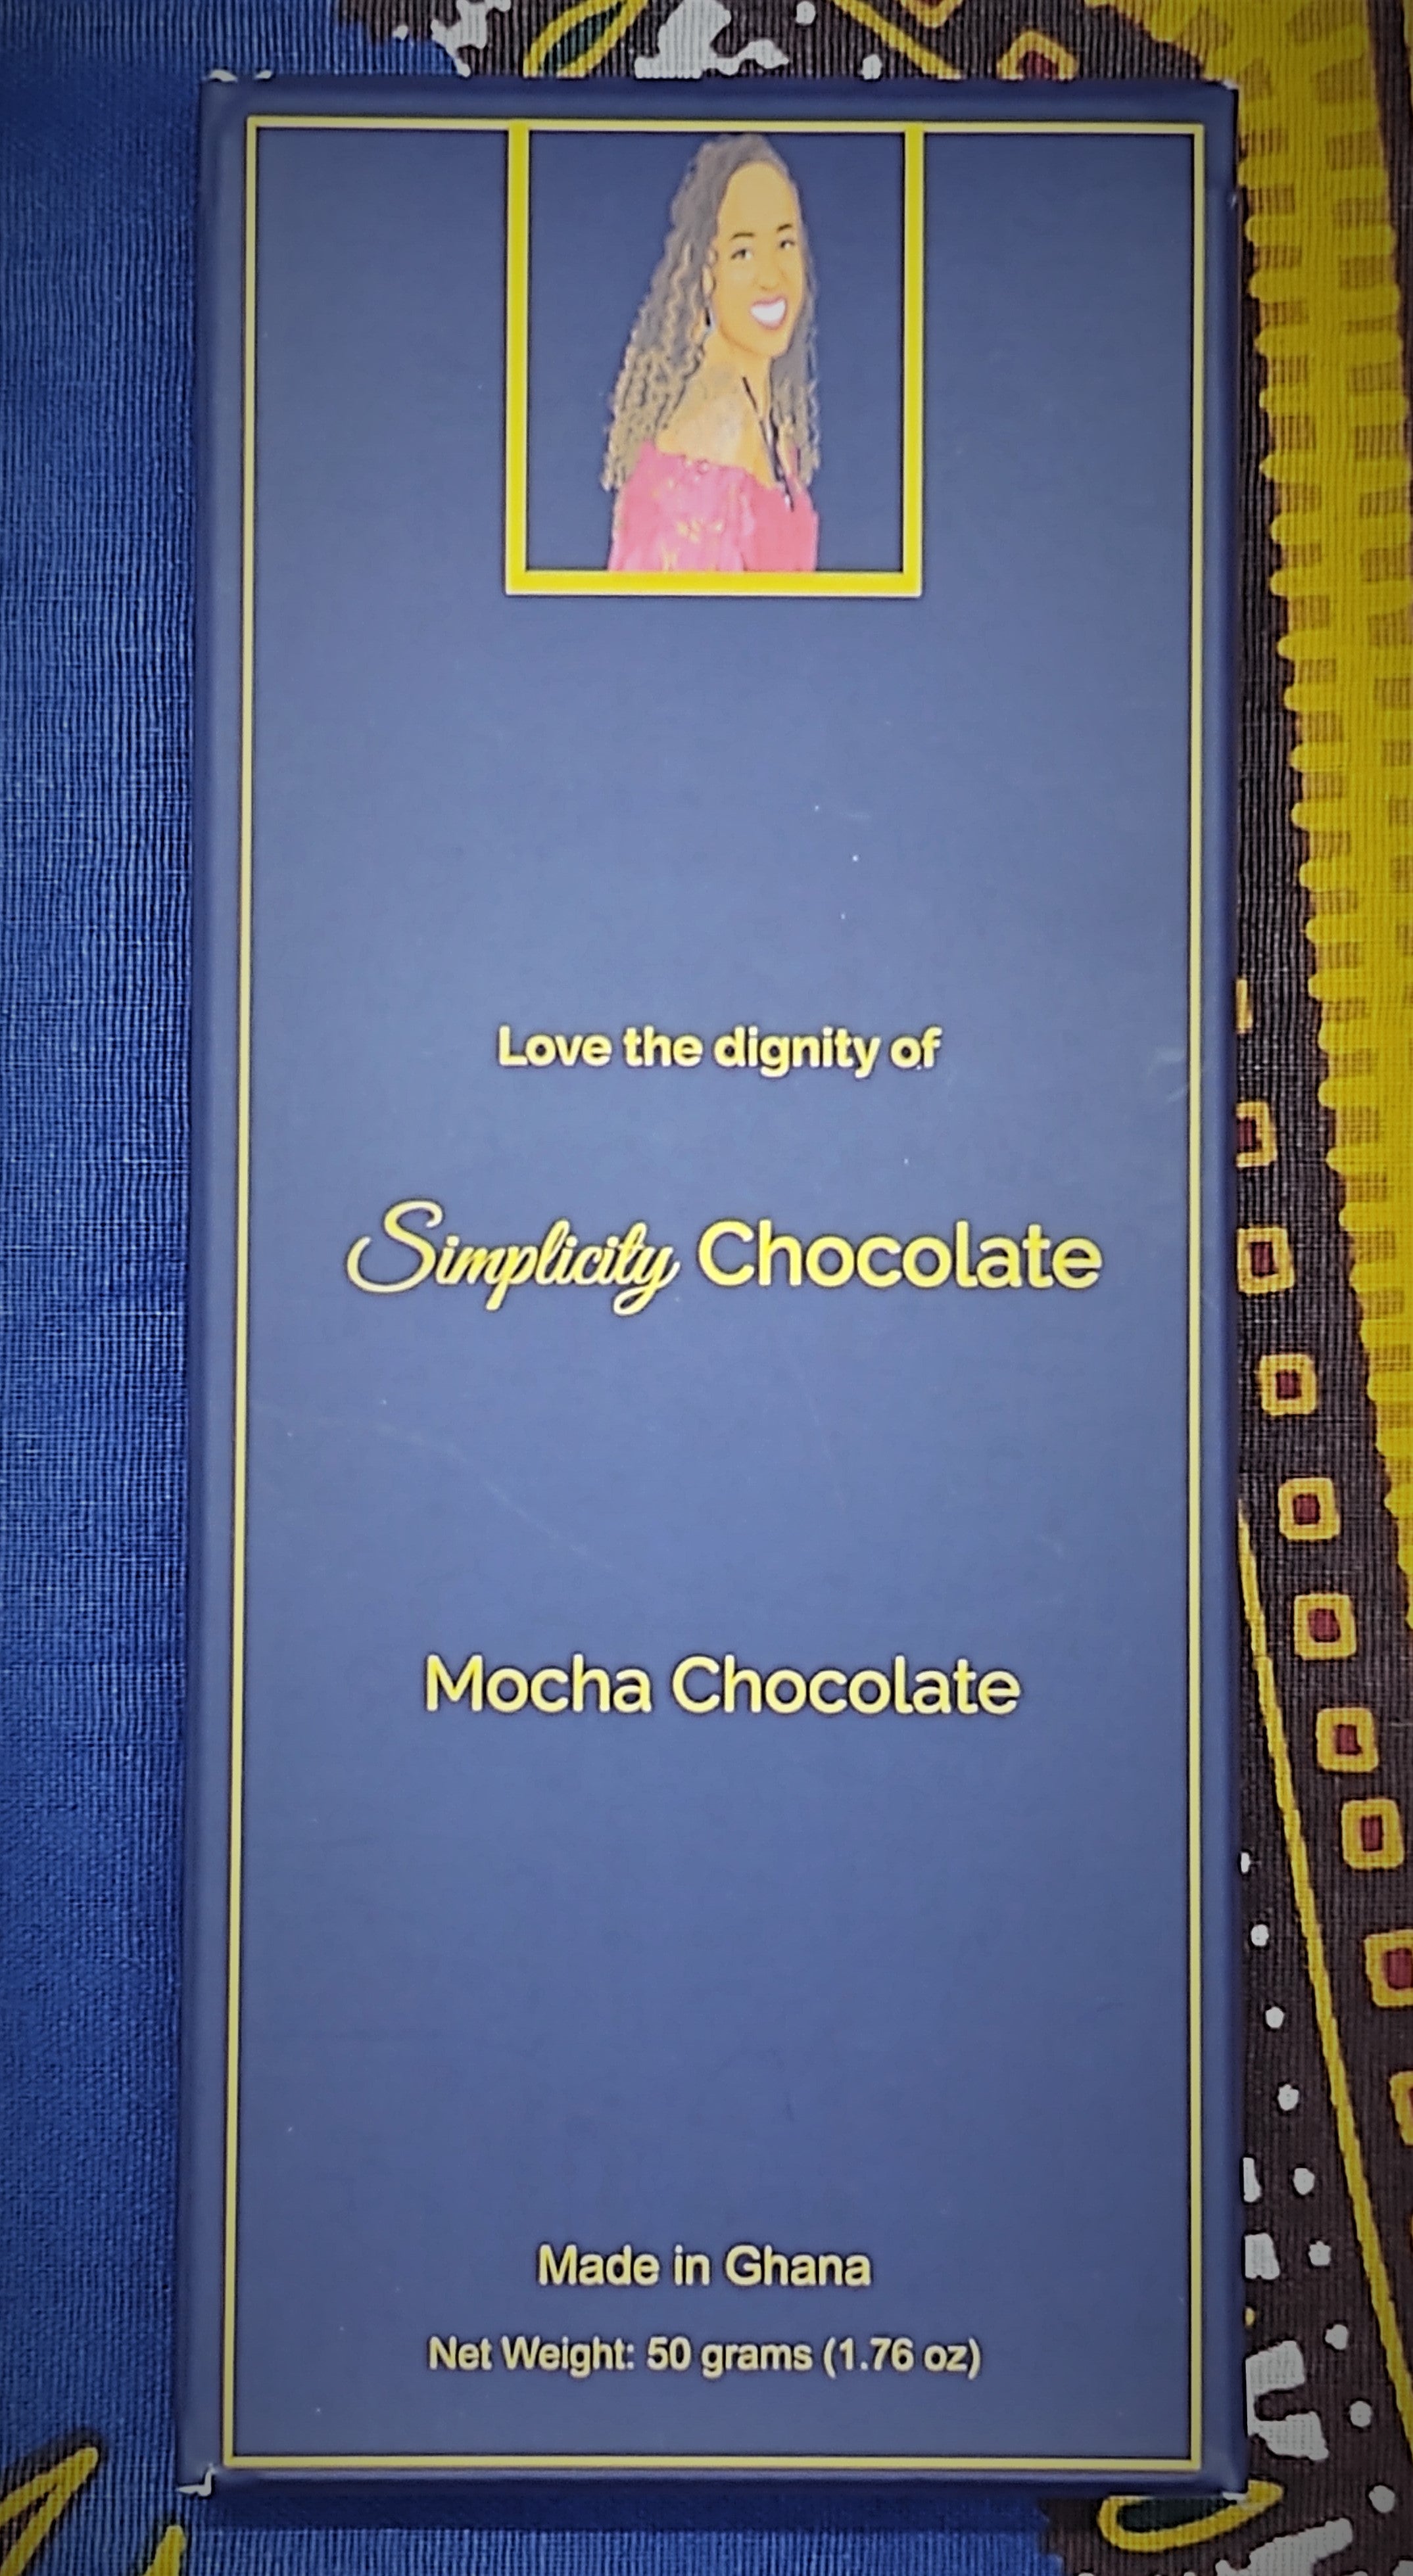 Pictured: The Simplicity Chocolate bar wrapped in complete packaging which consists of a dark blue box with gold writing. A portrait of the CEO is centered at the top of the packaging. The CEO is seated, looking over her right shoulder, wearing a magenta, off the shoulder top and a royal blue gemstone necklace with matching earrings. The packaging reads, "Love the dignity of Simplicity Chocolate" in the center of the package. Mocha Chocolate. Made in Ghana. Net Weight: 50 grams (1.76 oz).